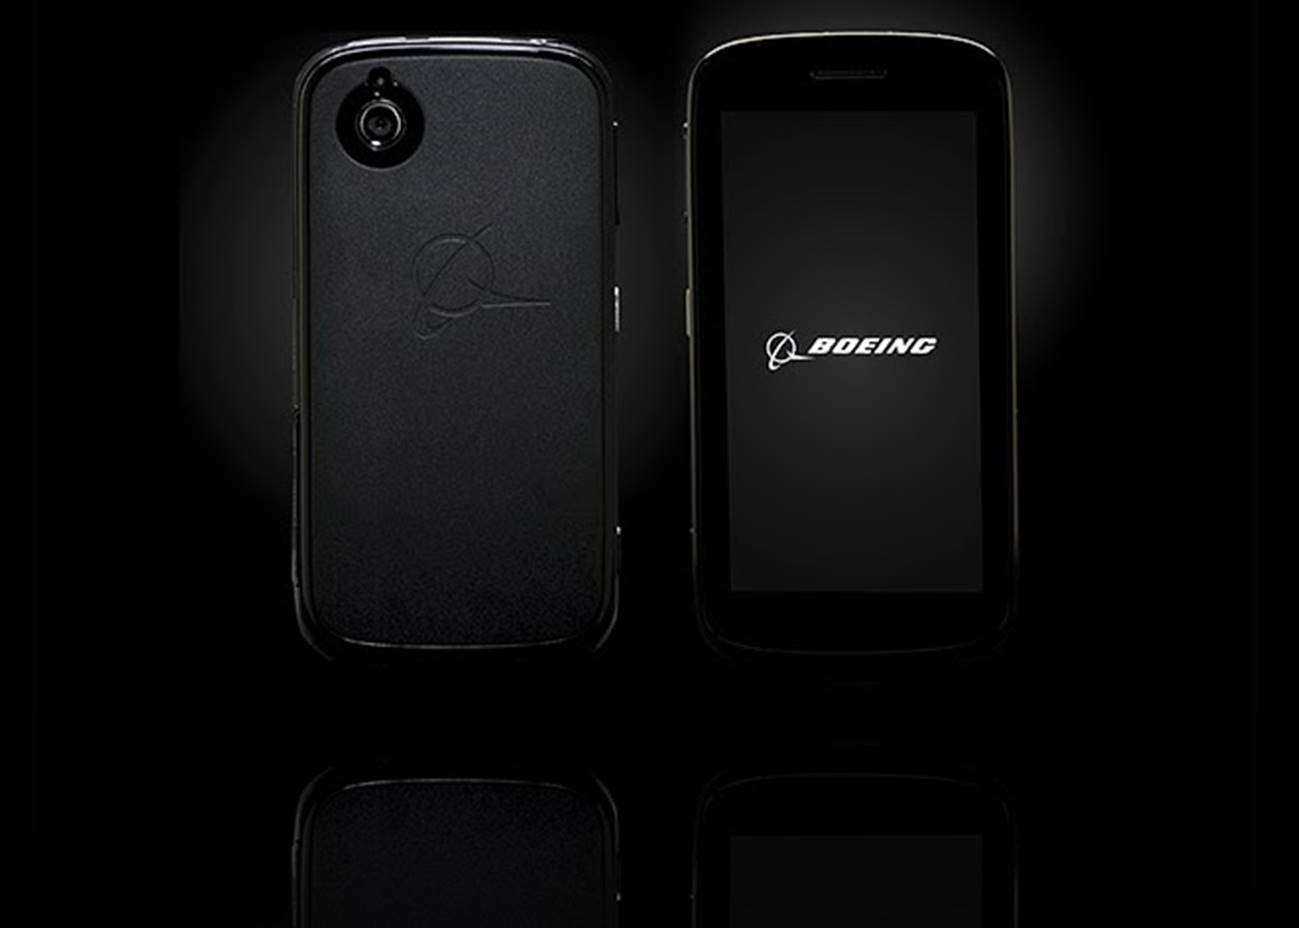 Boeing Just Revealed a Self-Destructing Phone